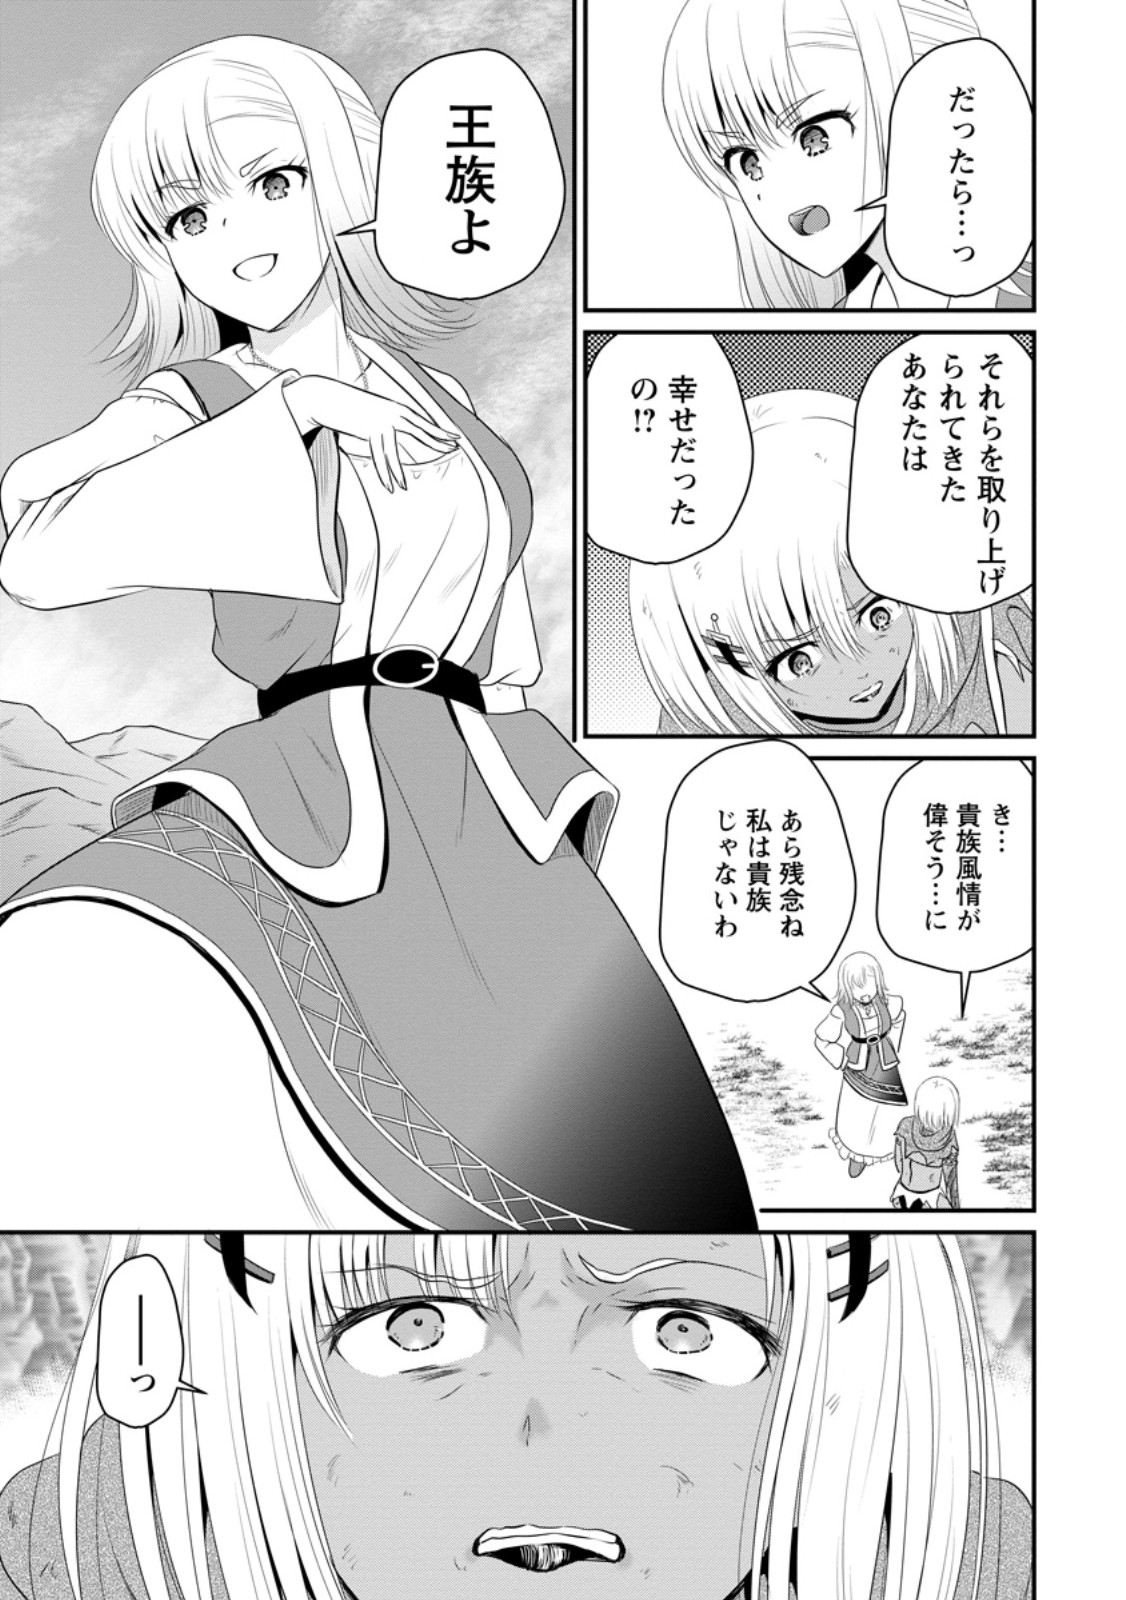 The Frontier Life of The Low-Class Ossan Healer And The Lovery Girl - Chapter 46.3 - Page 1